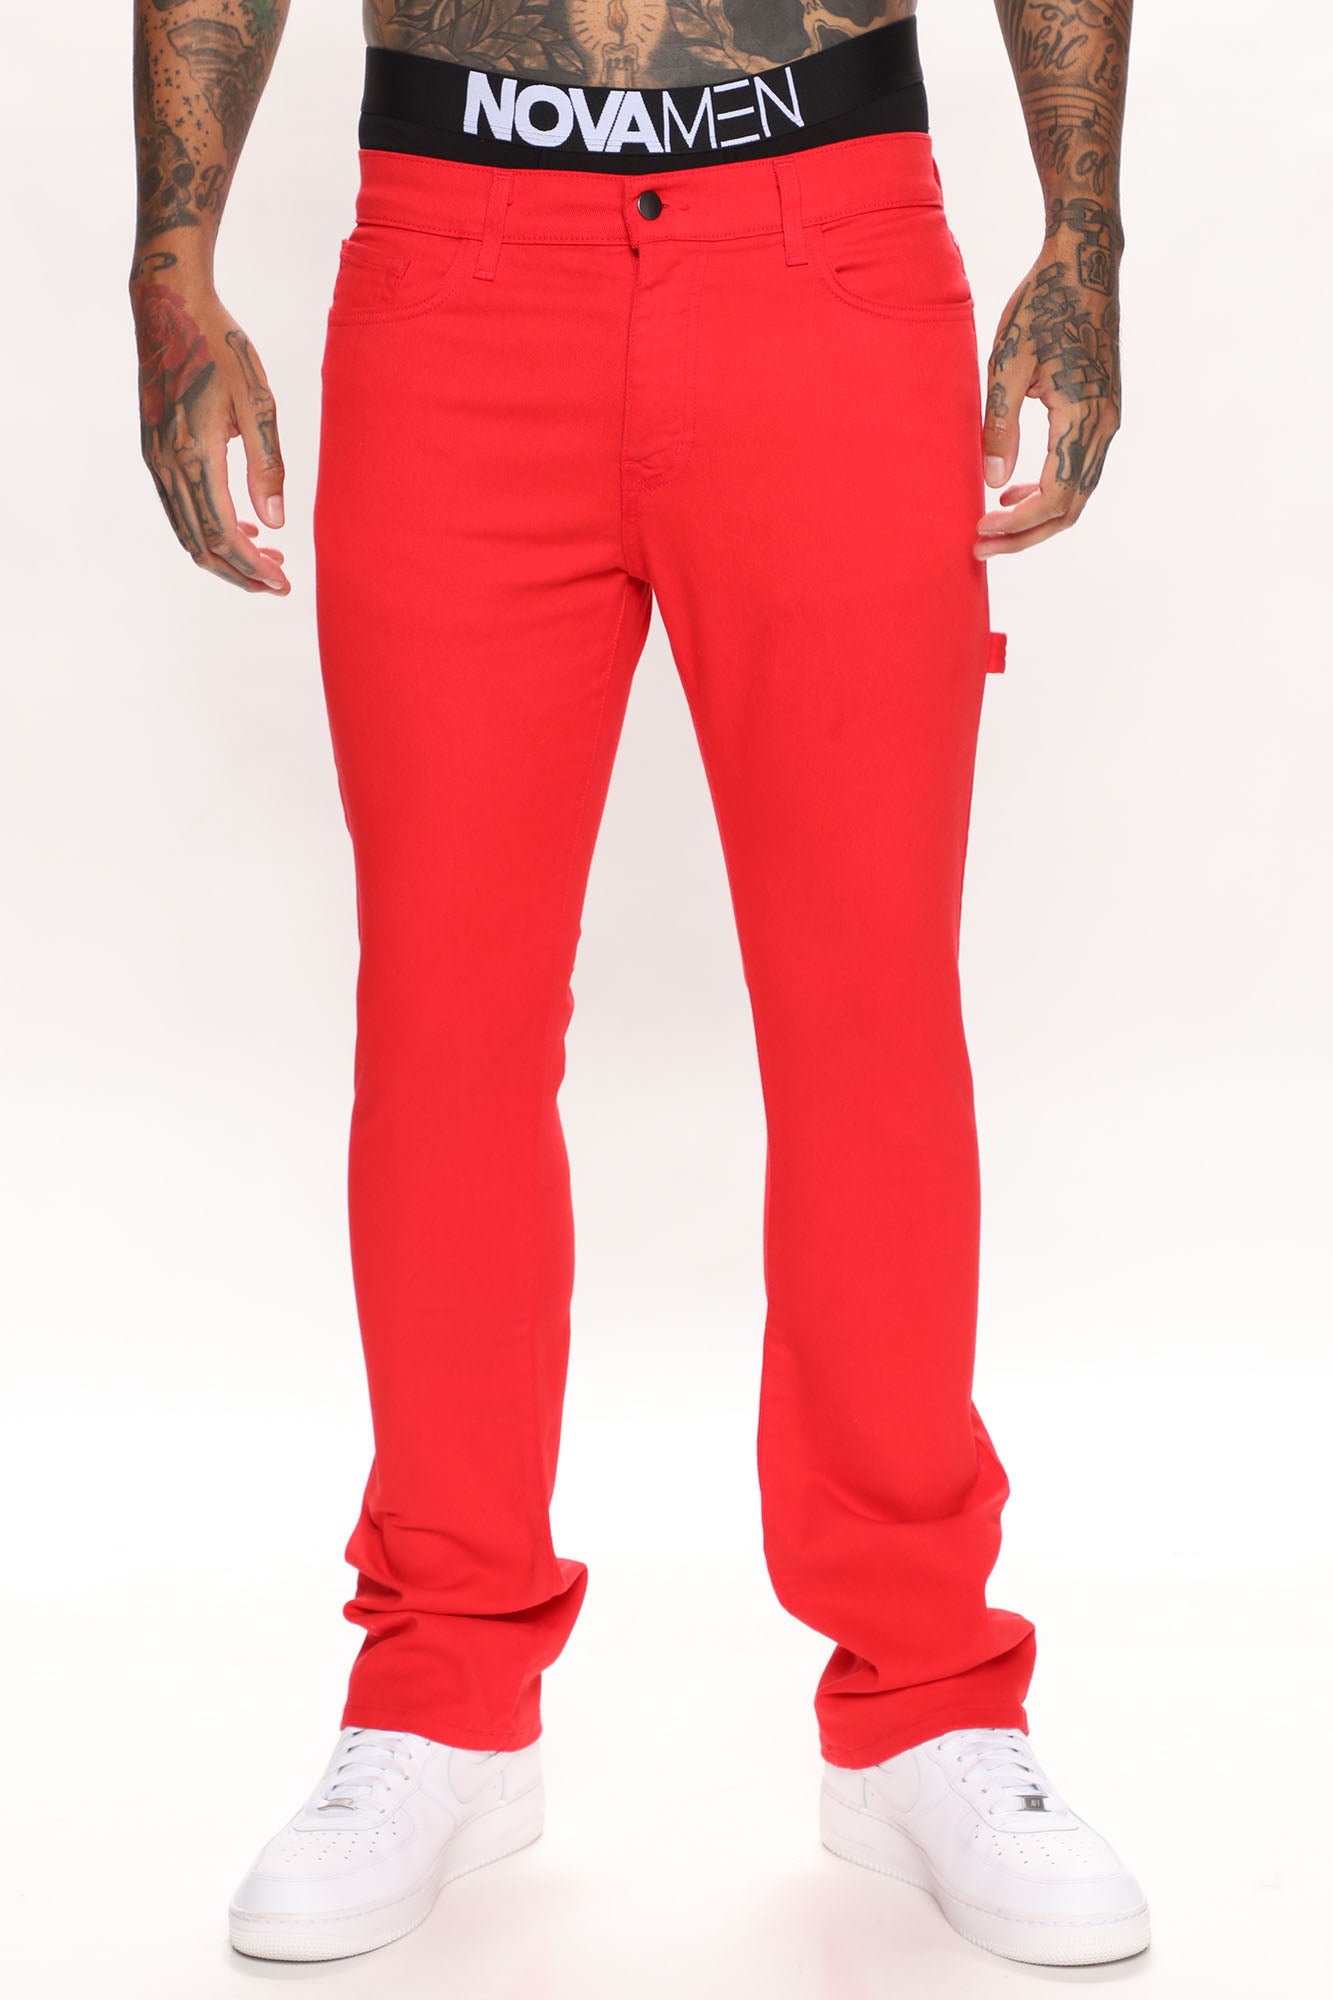 Red Skinny Jeans: Under $50